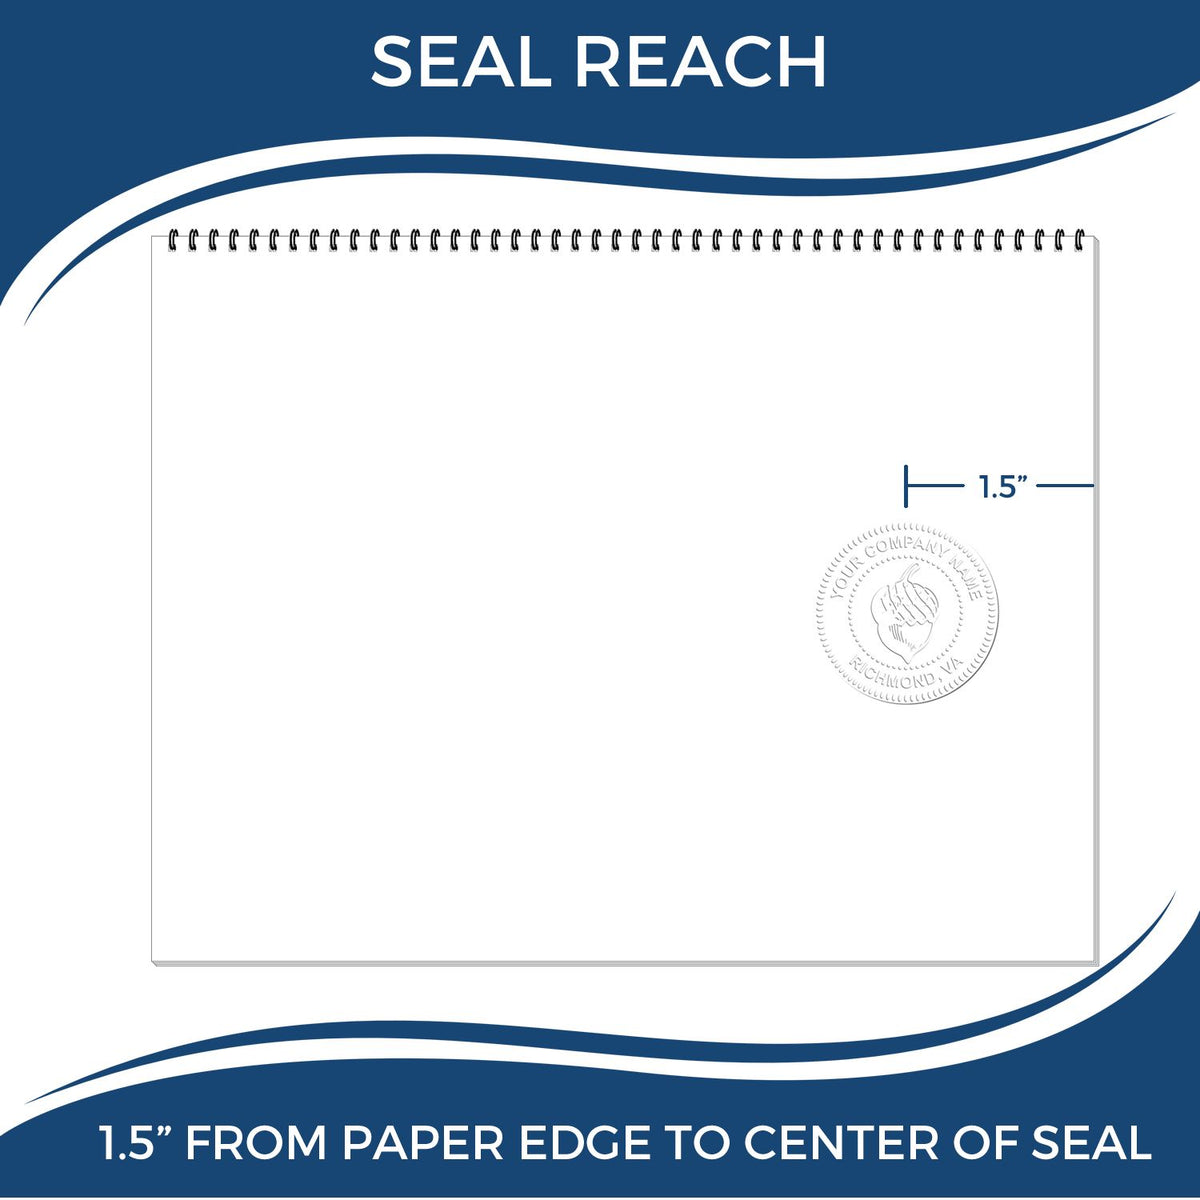 An infographic showing the seal reach which is represented by a ruler and a miniature seal image of the Gift Connecticut Architect Seal